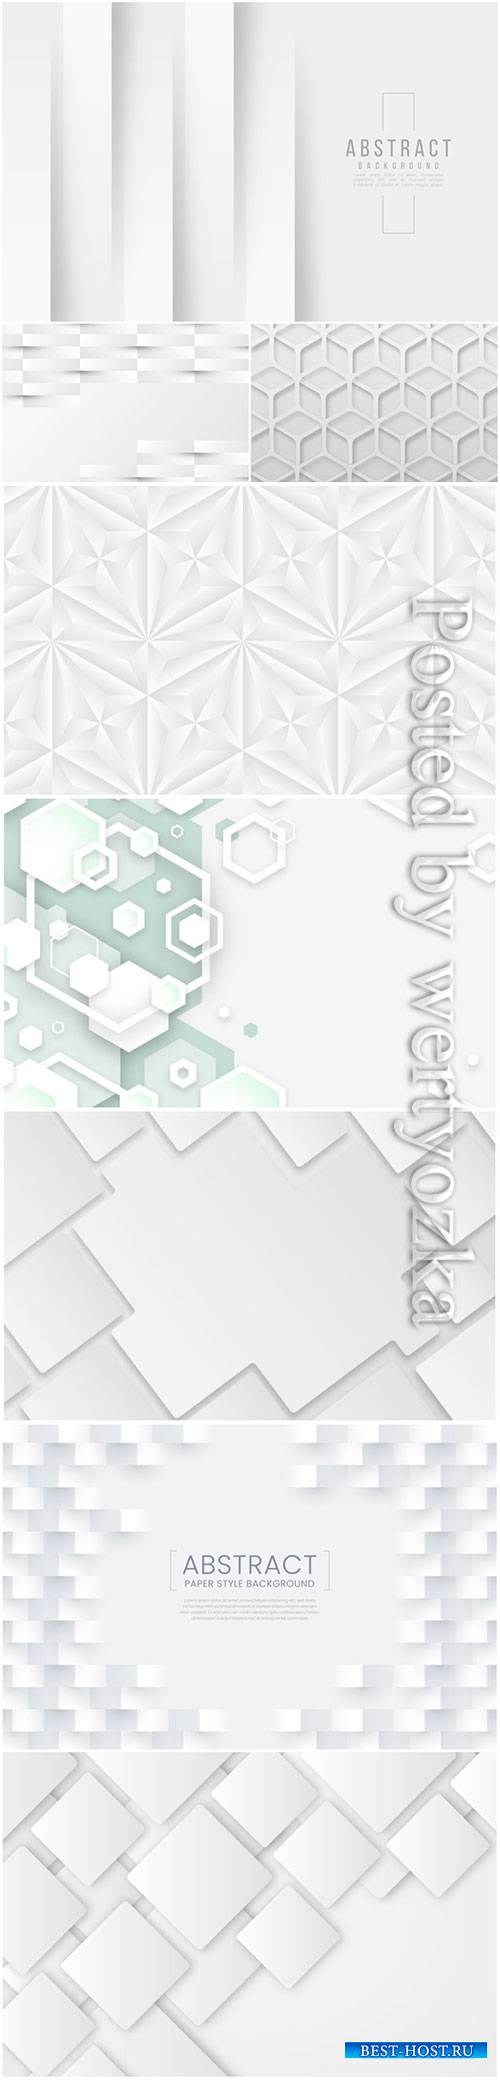 Abstract vector background, 3d models template # 9